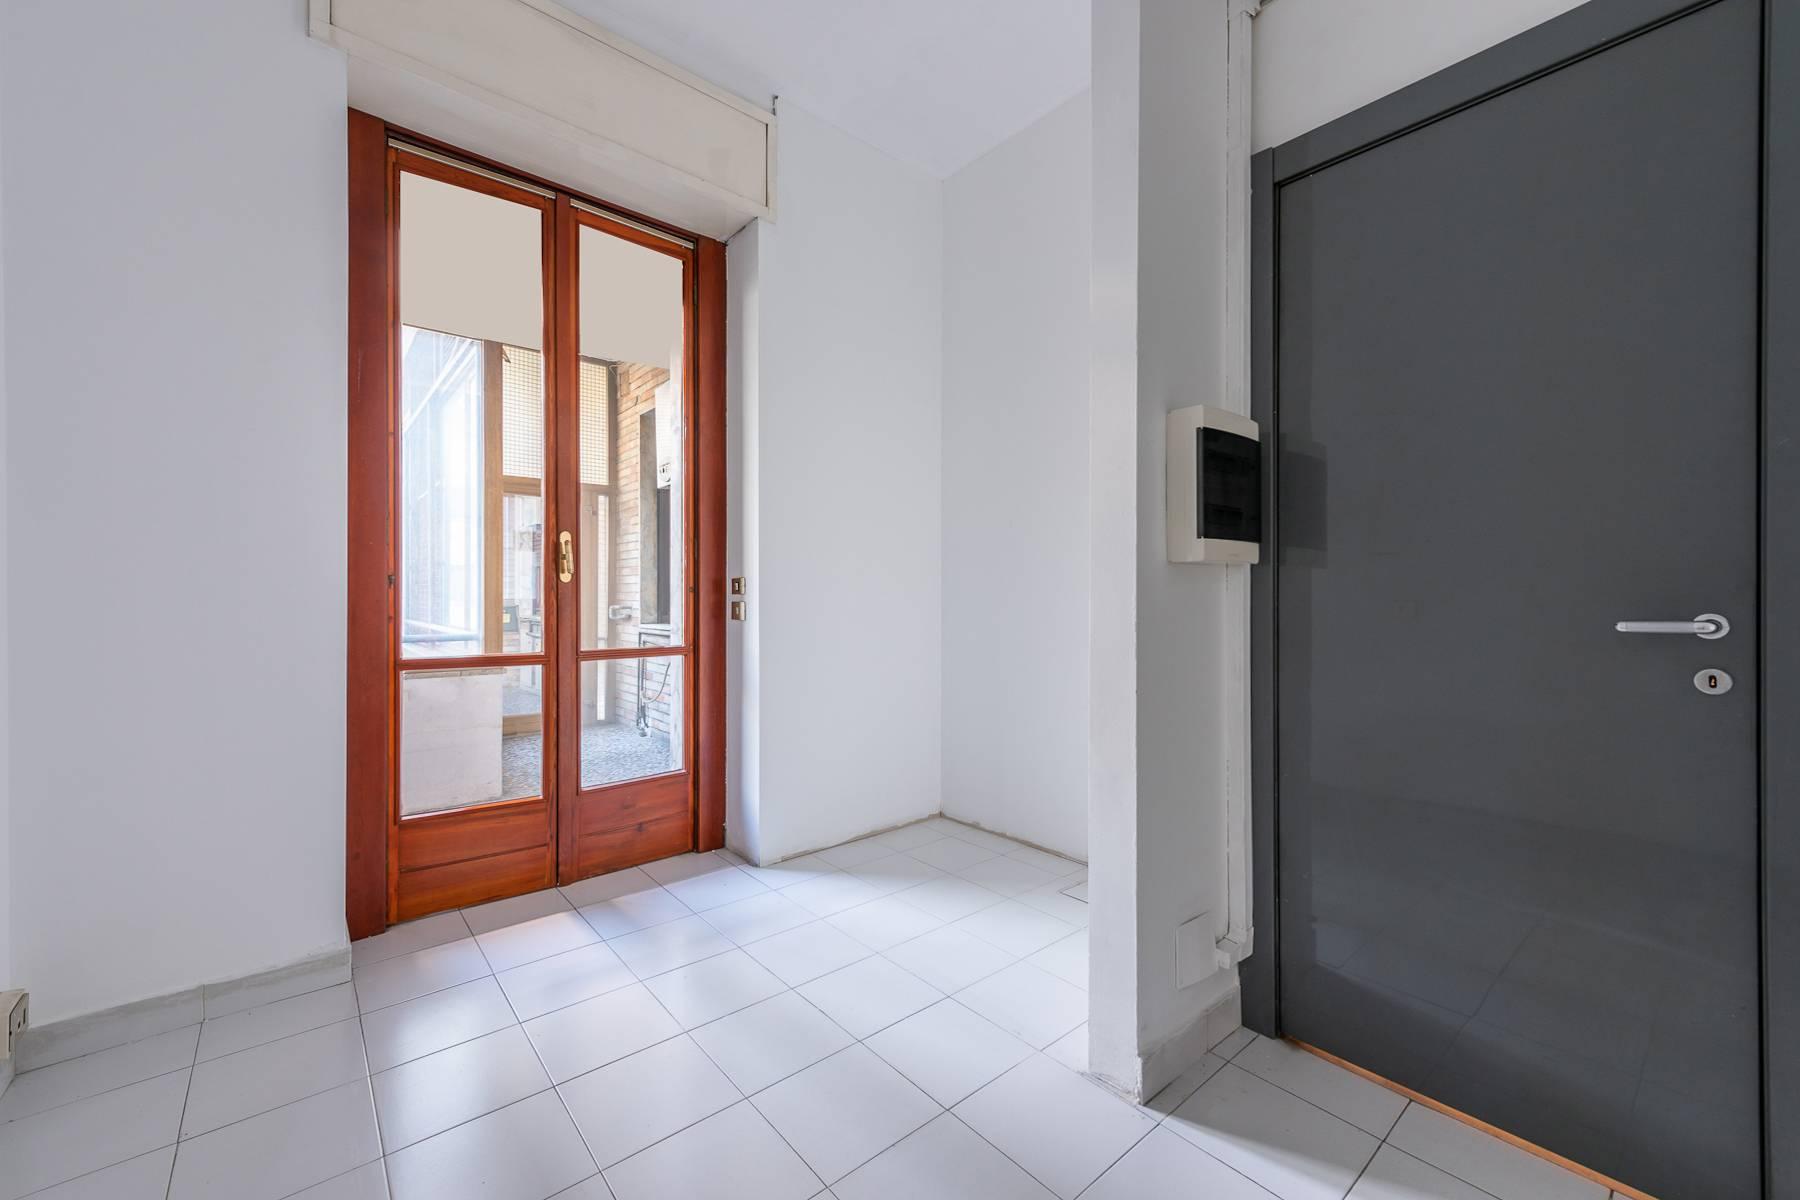 Office of about 200 square meters for rent in the Court area - 29